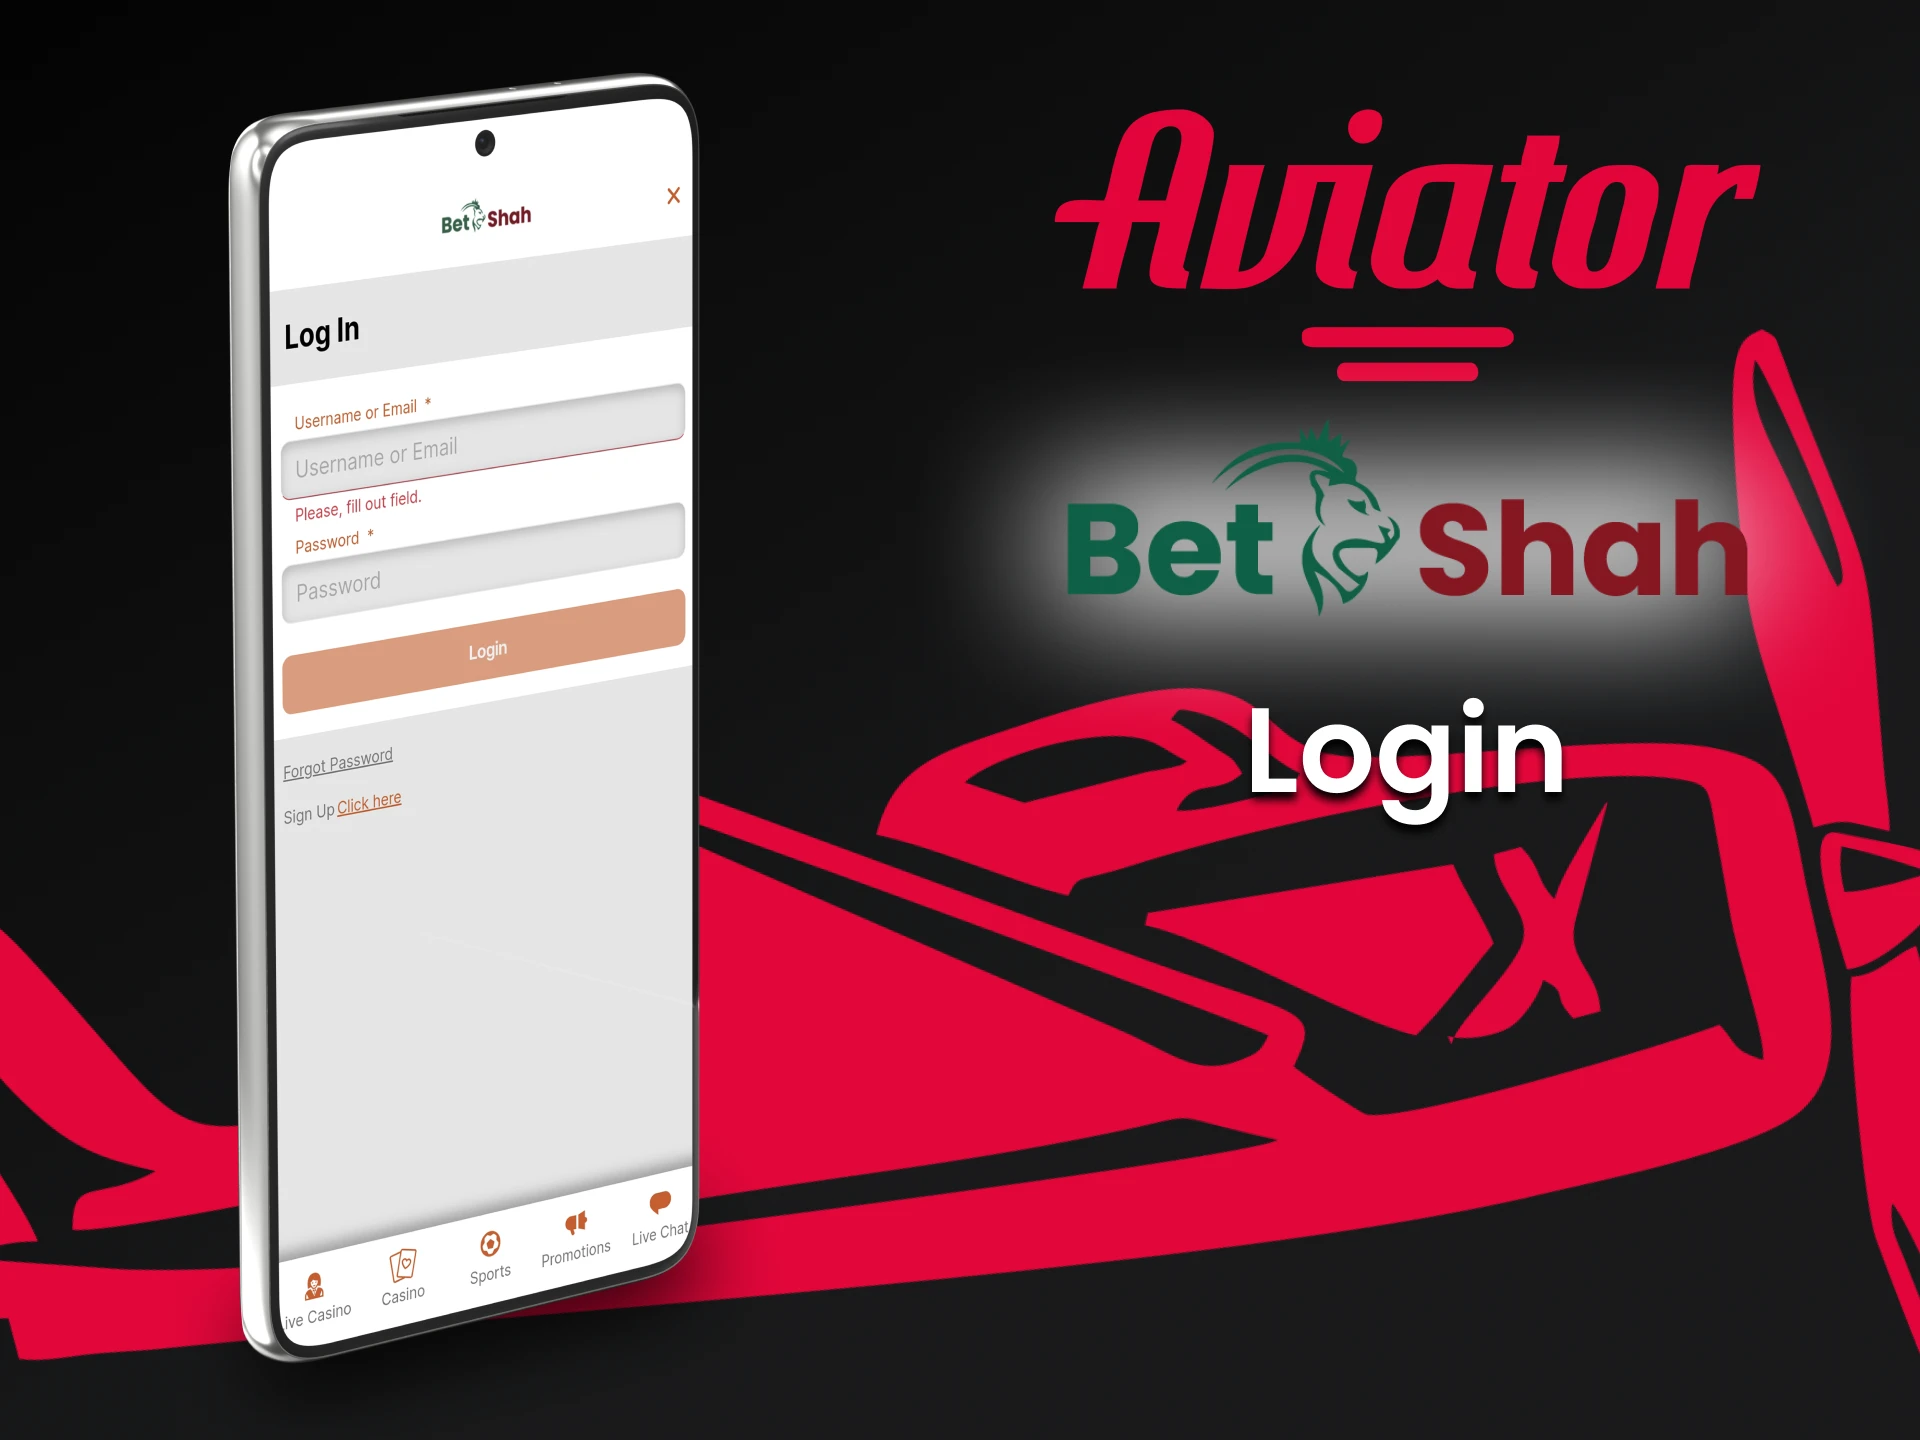 Log in to your personal account in the BetShah app to play Aviator.